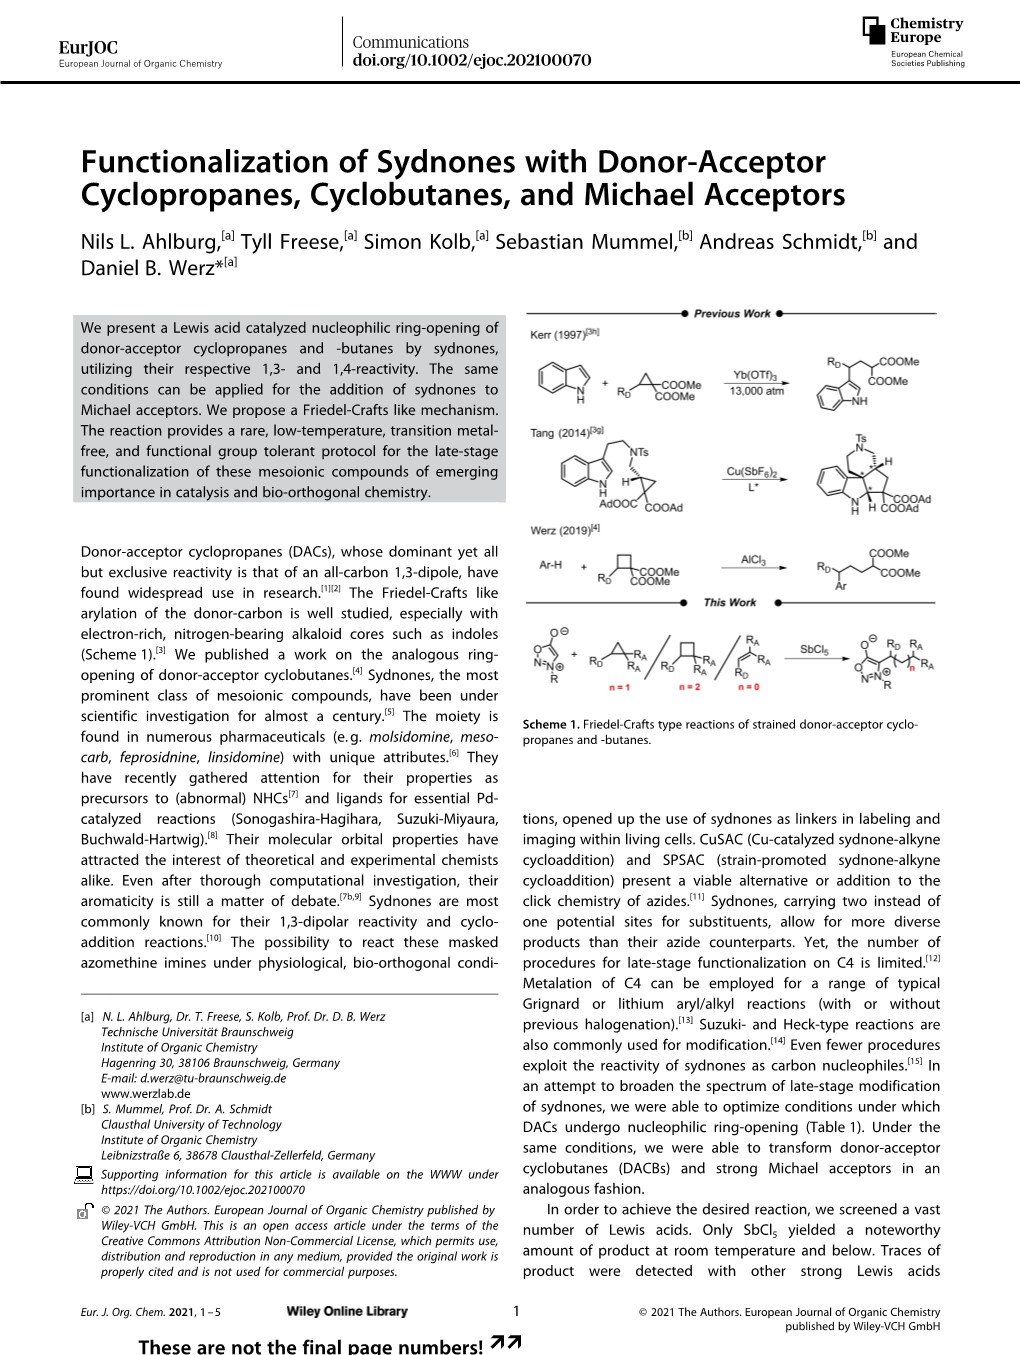 Functionalization of Sydnones with Donor‐Acceptor Cyclopropanes, Cyclobutanes, and Michael Acceptors